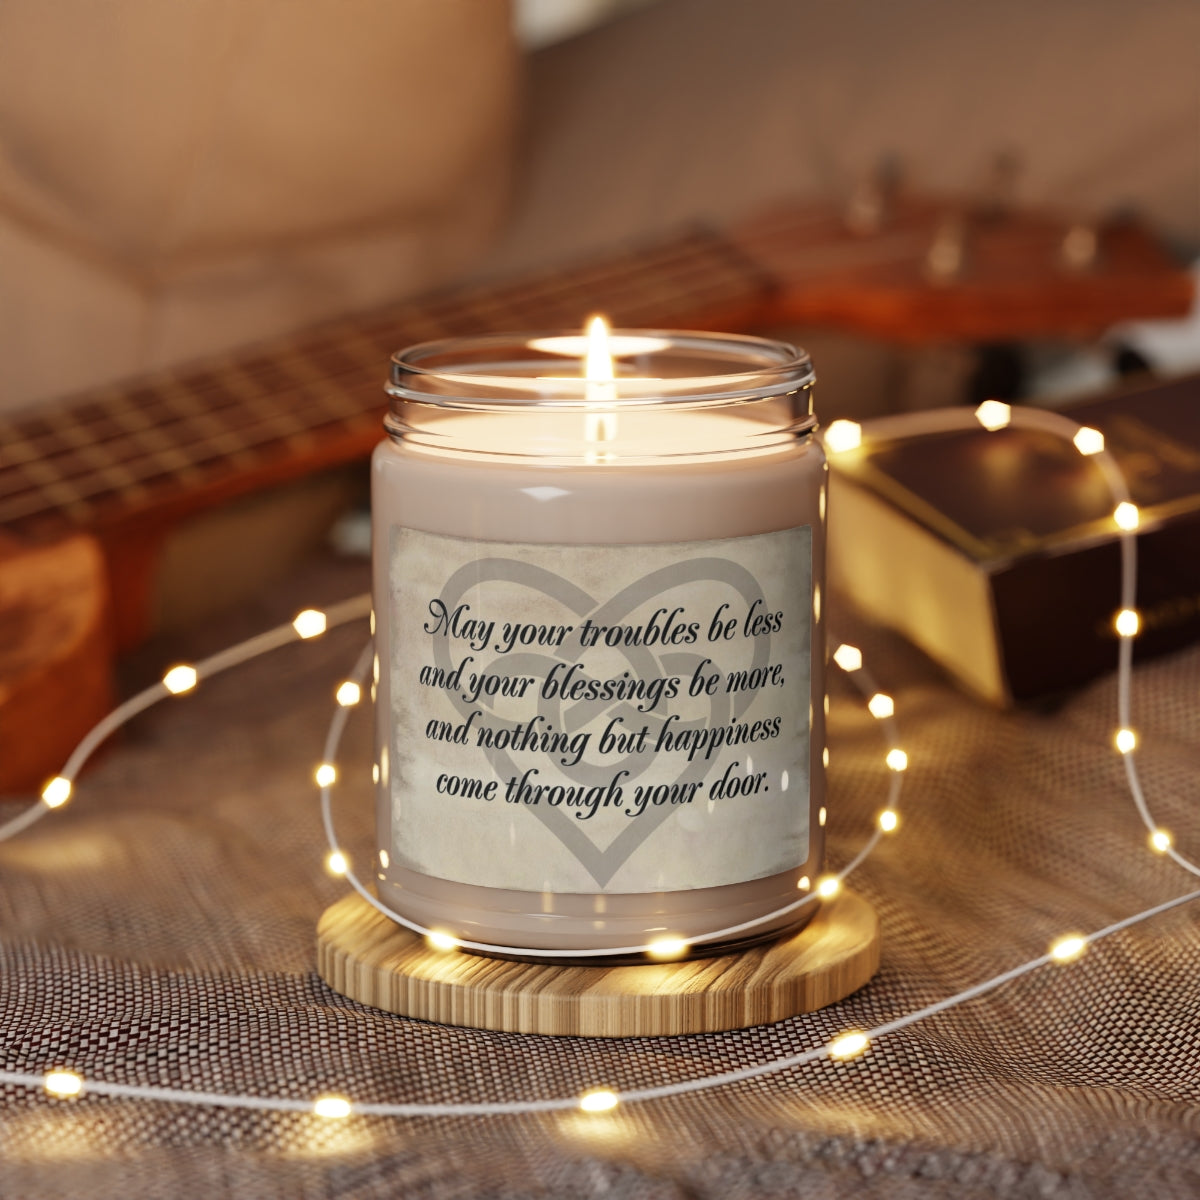 House Blessing Candle, Housewarming, Housewarming Gifts, Housewarm Gift, Blessing Candle